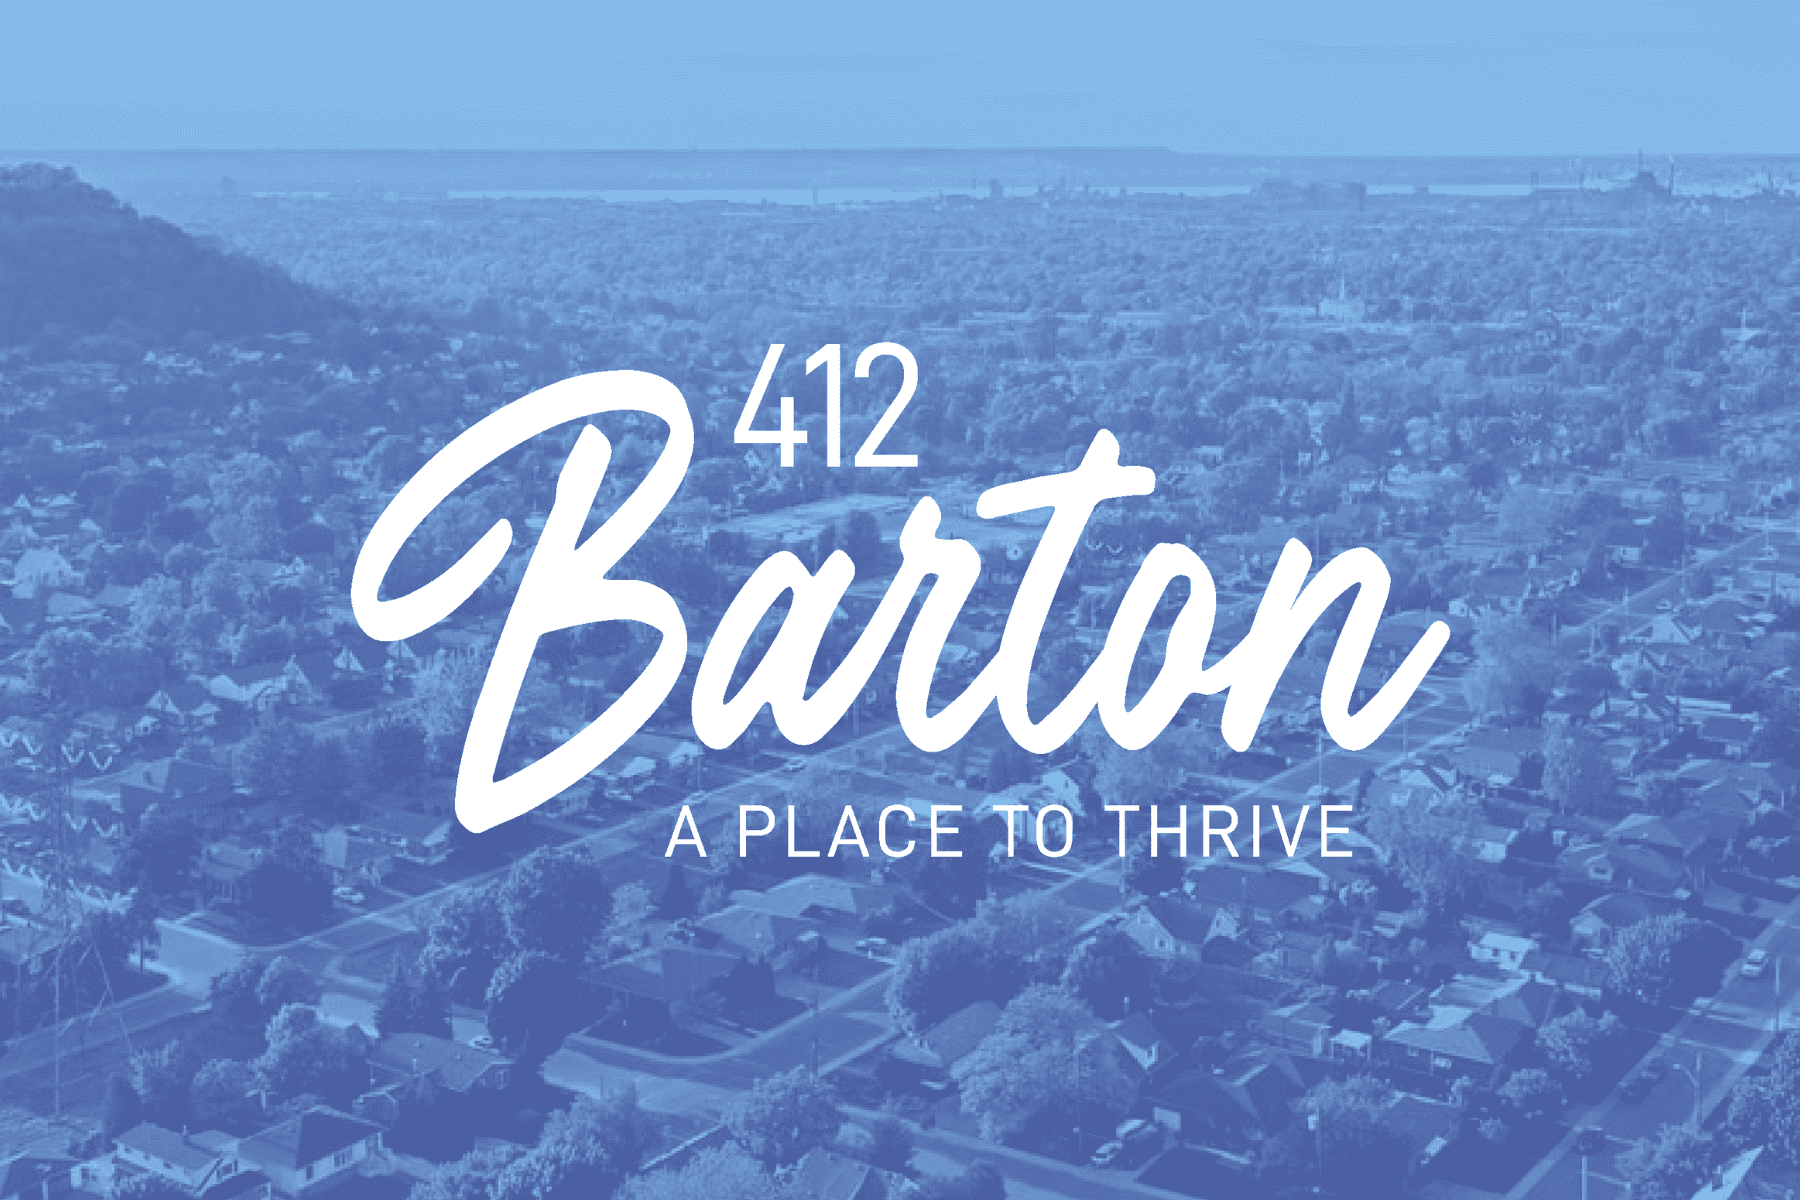 Blue duotone image of Hamilton with a white 412 Barton text-based logo on top